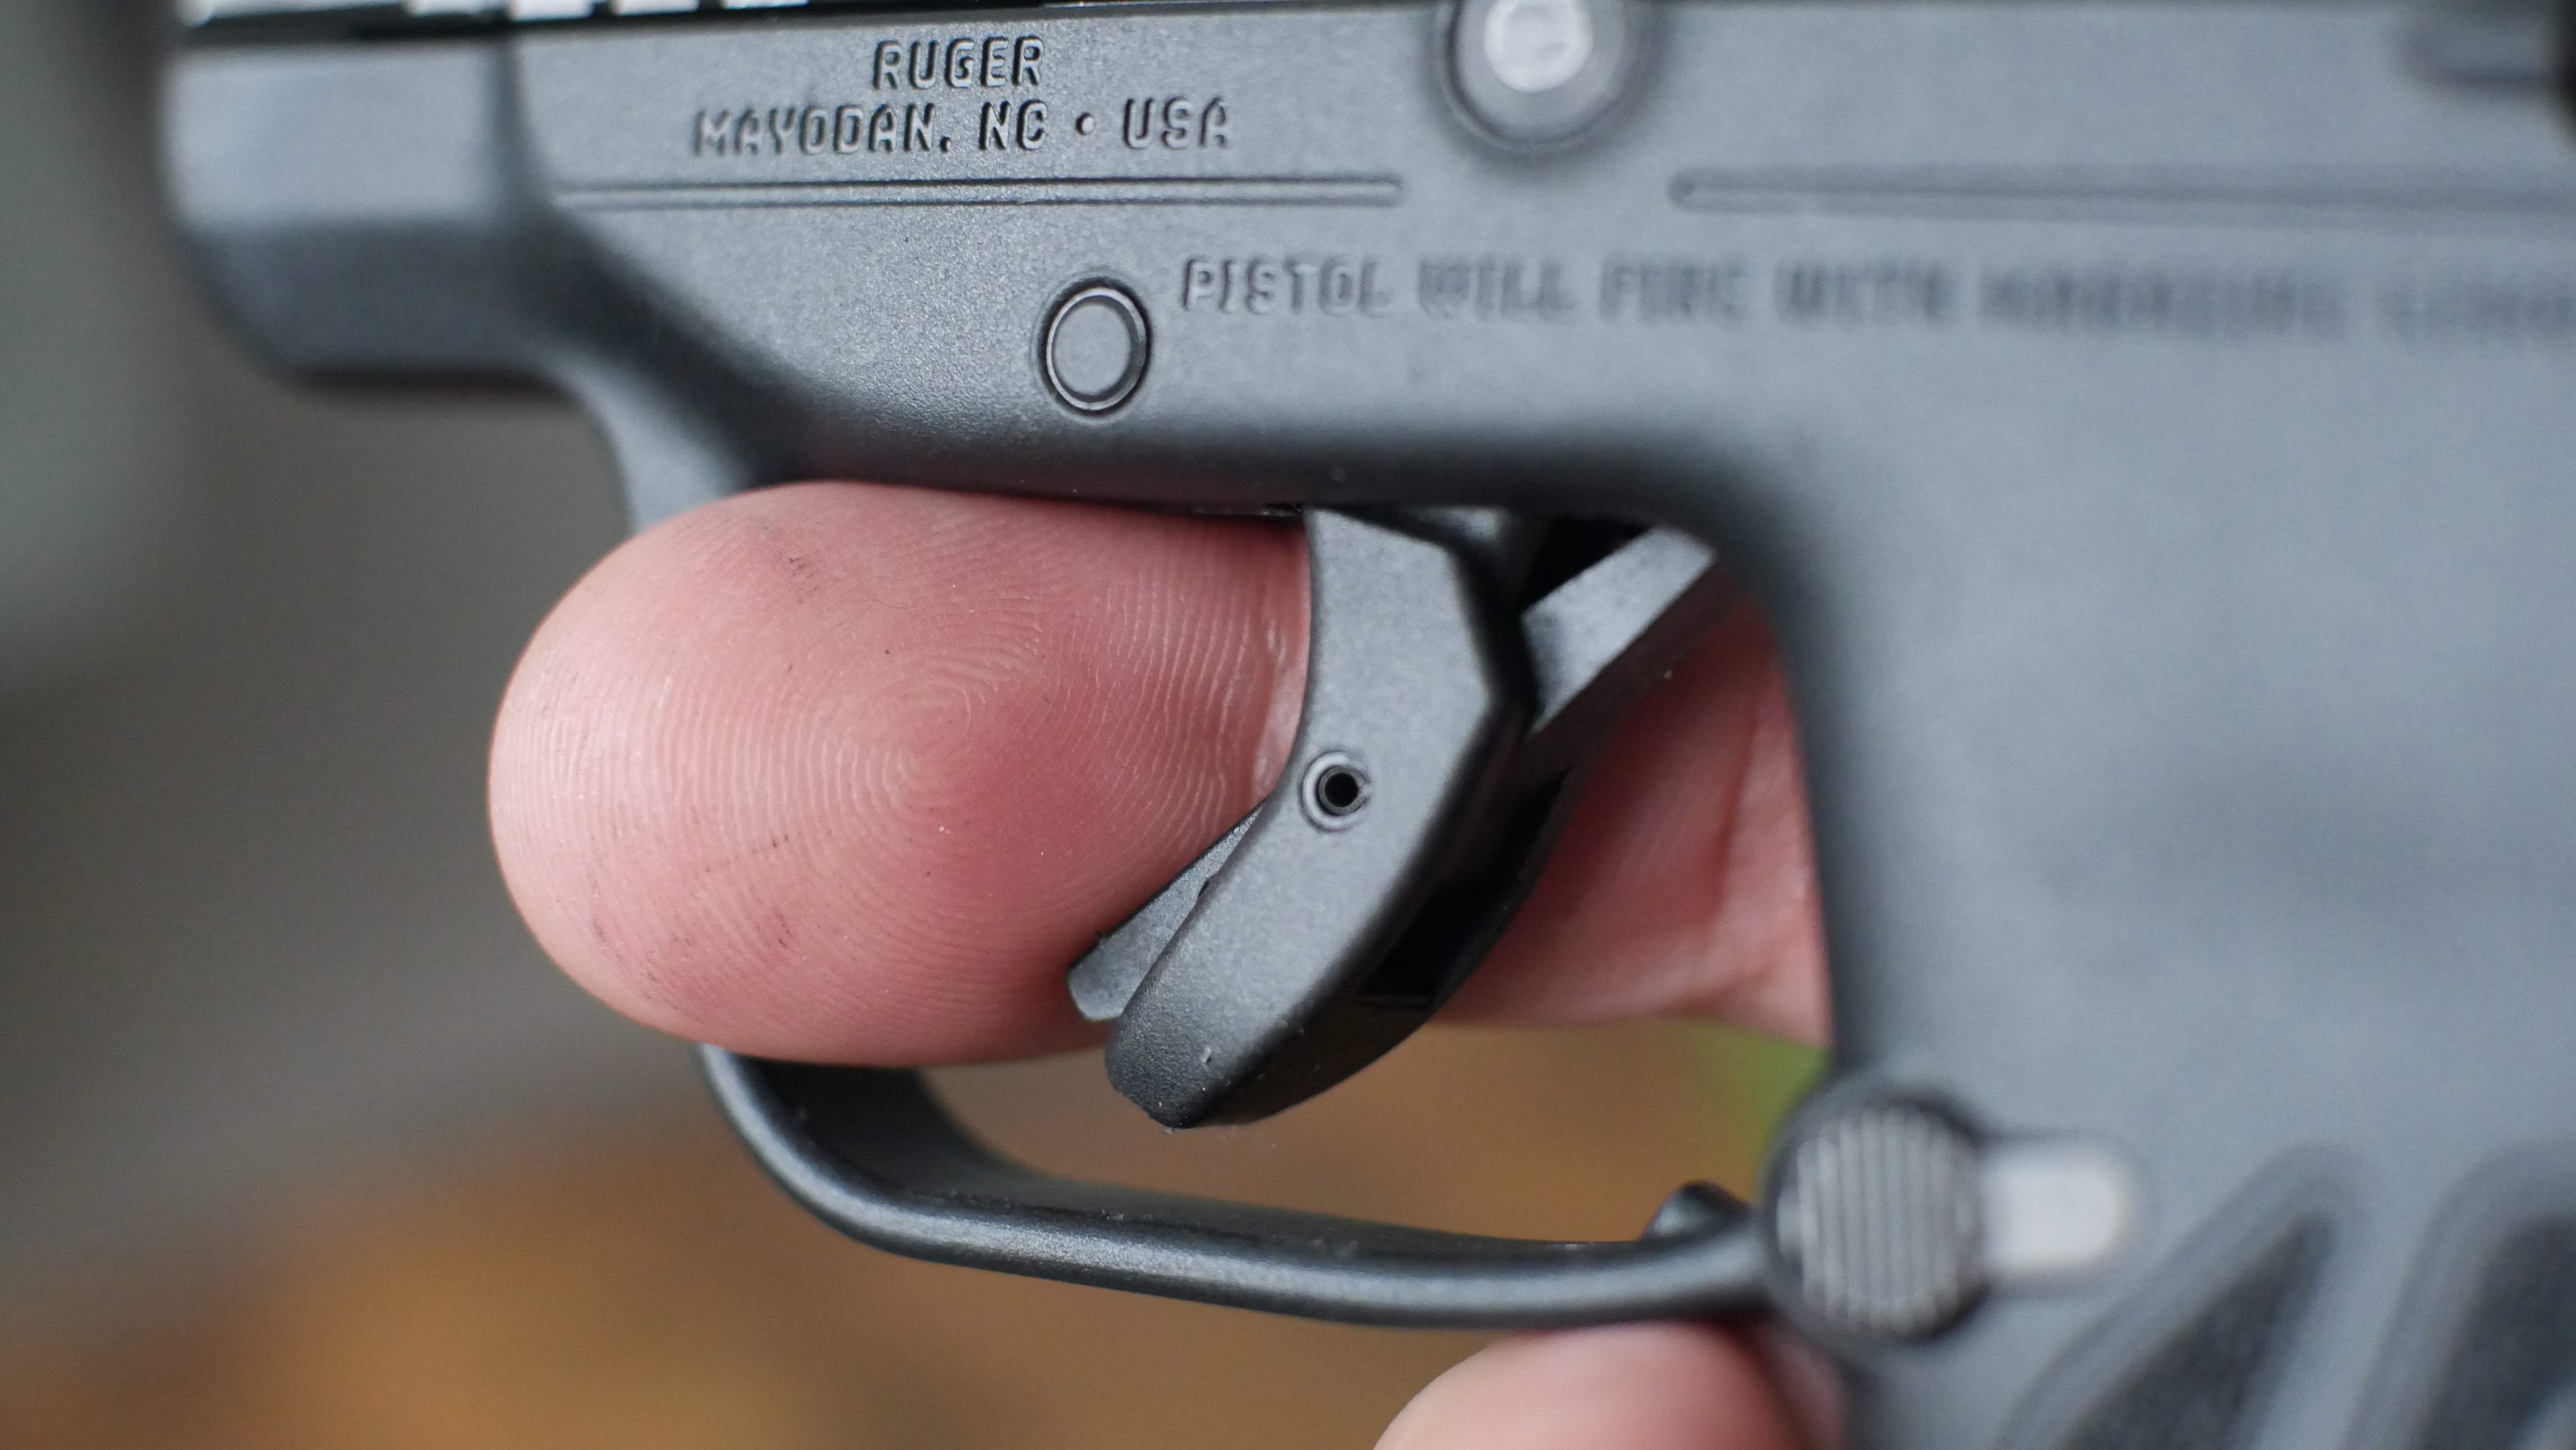 Before You Buy - The Ruger LCP MAX 380